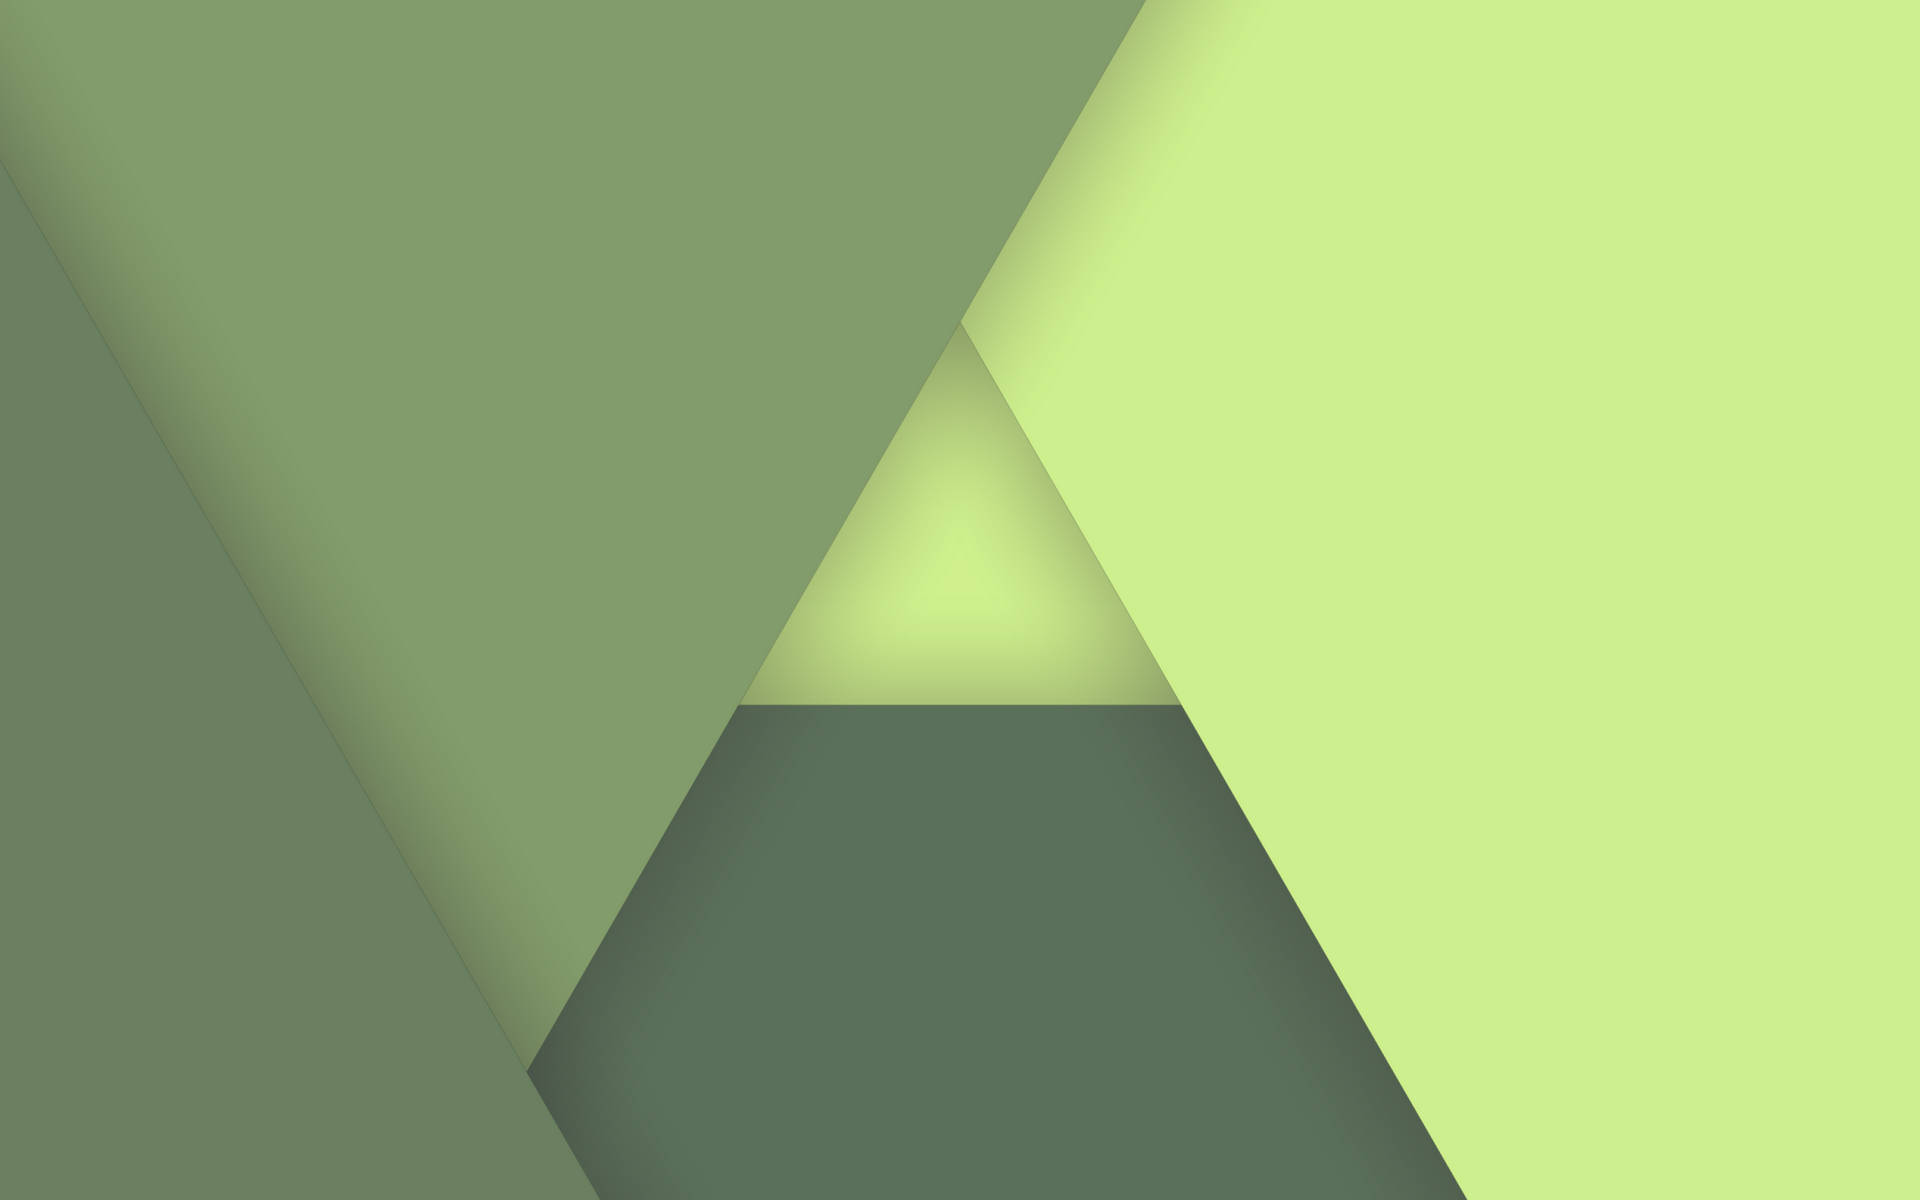 Static Green Triangles Background